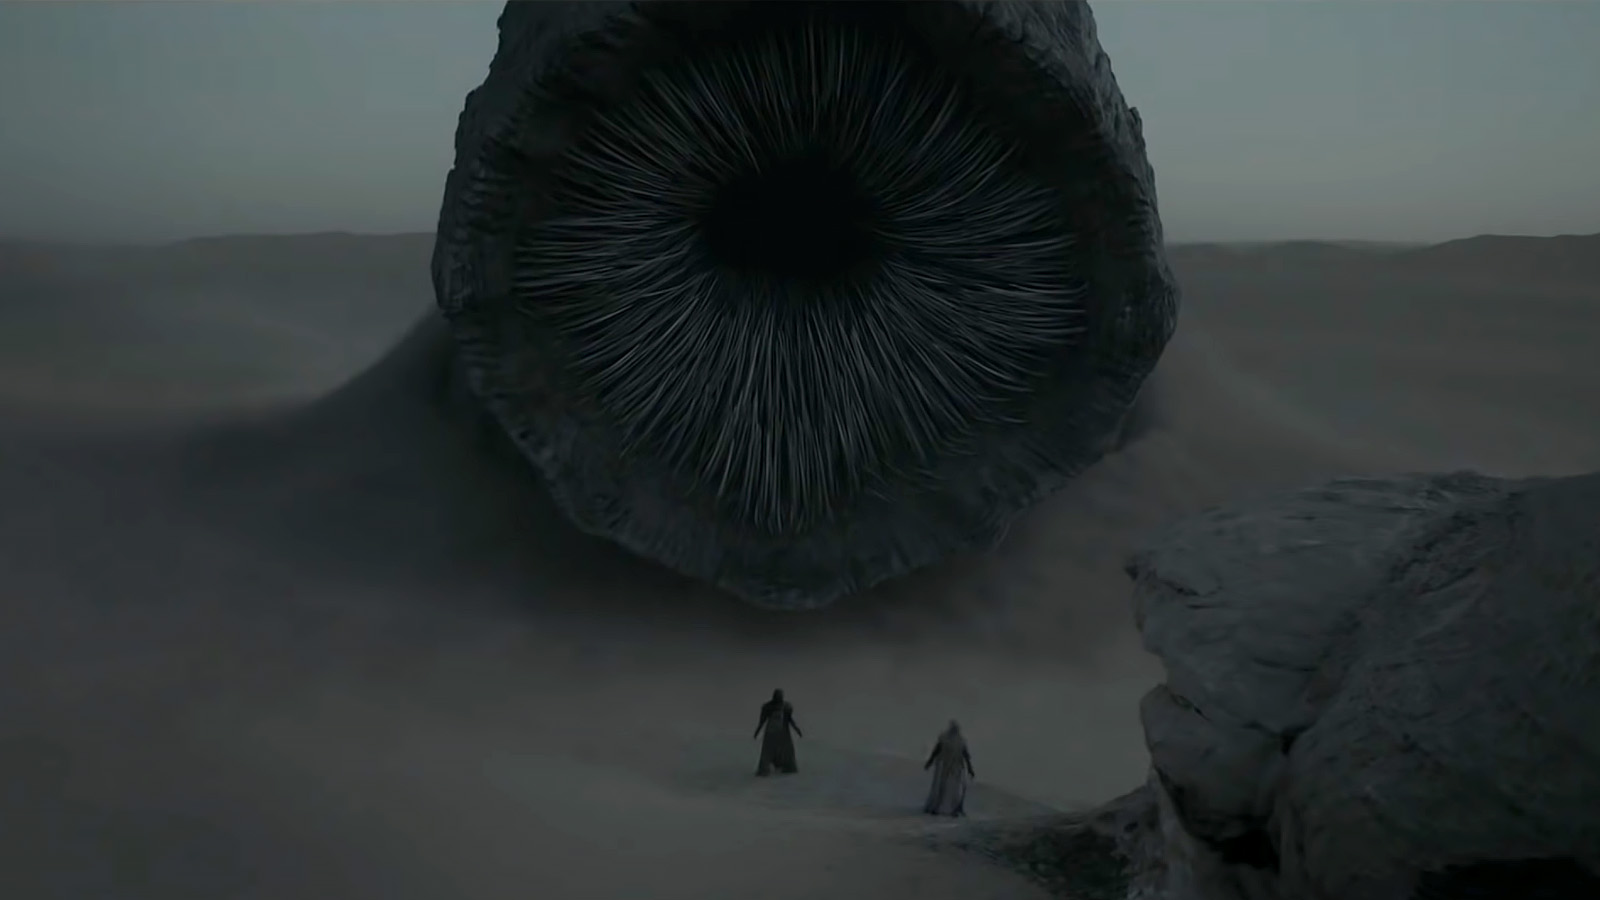 The scope and scale of Dune's effects should be seen on the big screen